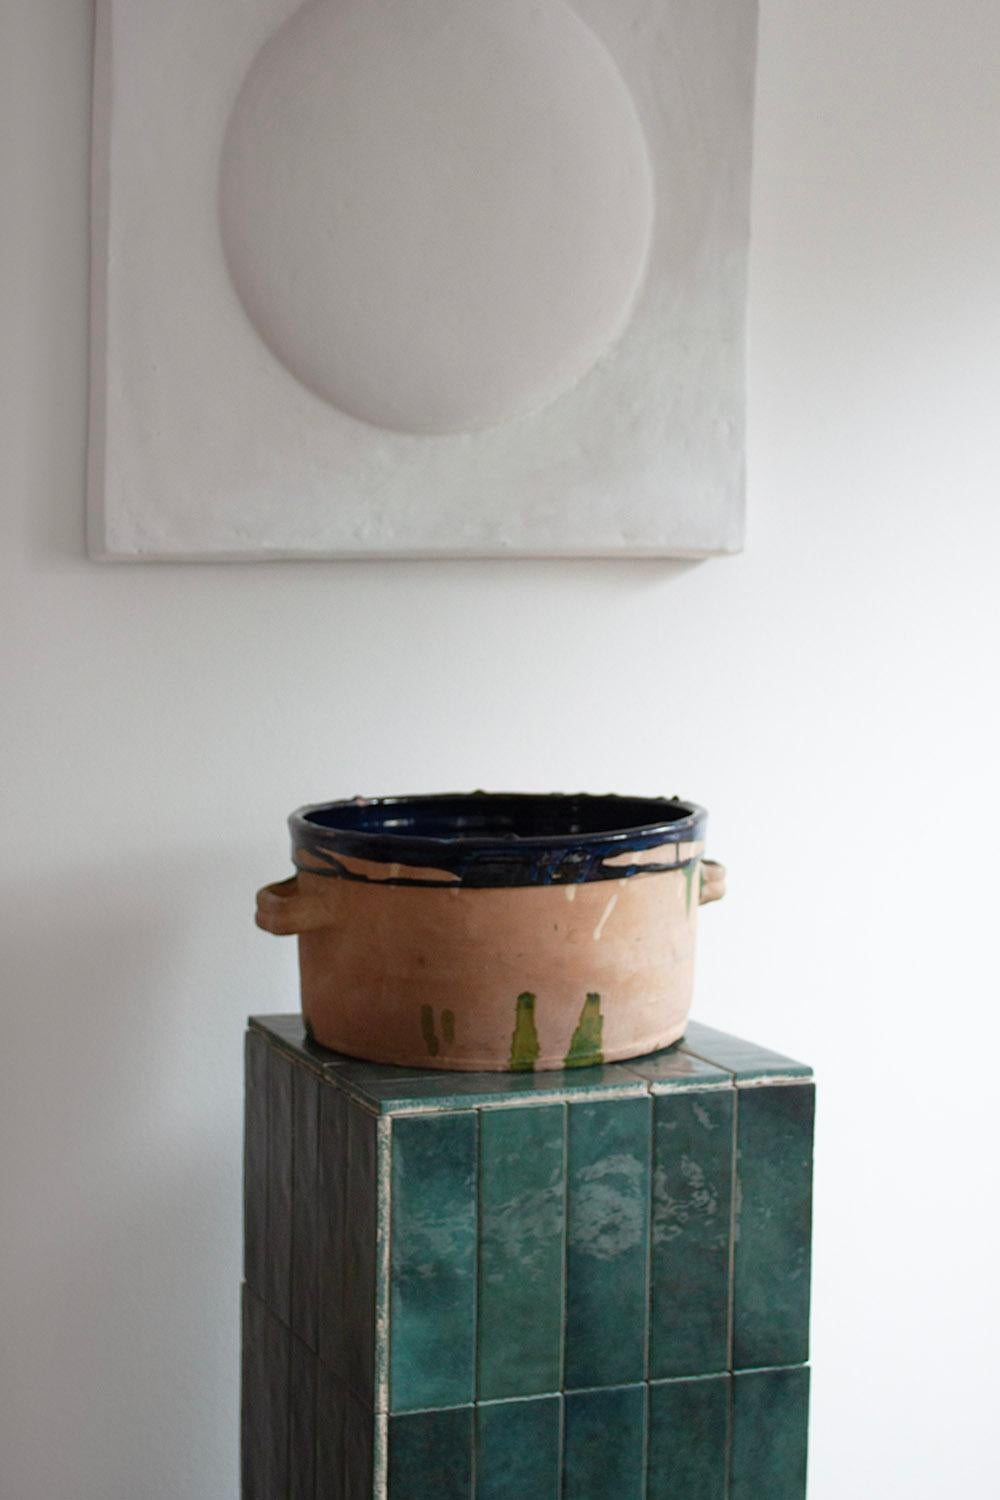 Shipping Note: If your region or country is not listed under the shipping options, please contact us directly.

This charming terracotta kitchen pot is glazed in beautiful dark green and blue tones, making it perfect for storing goods in the